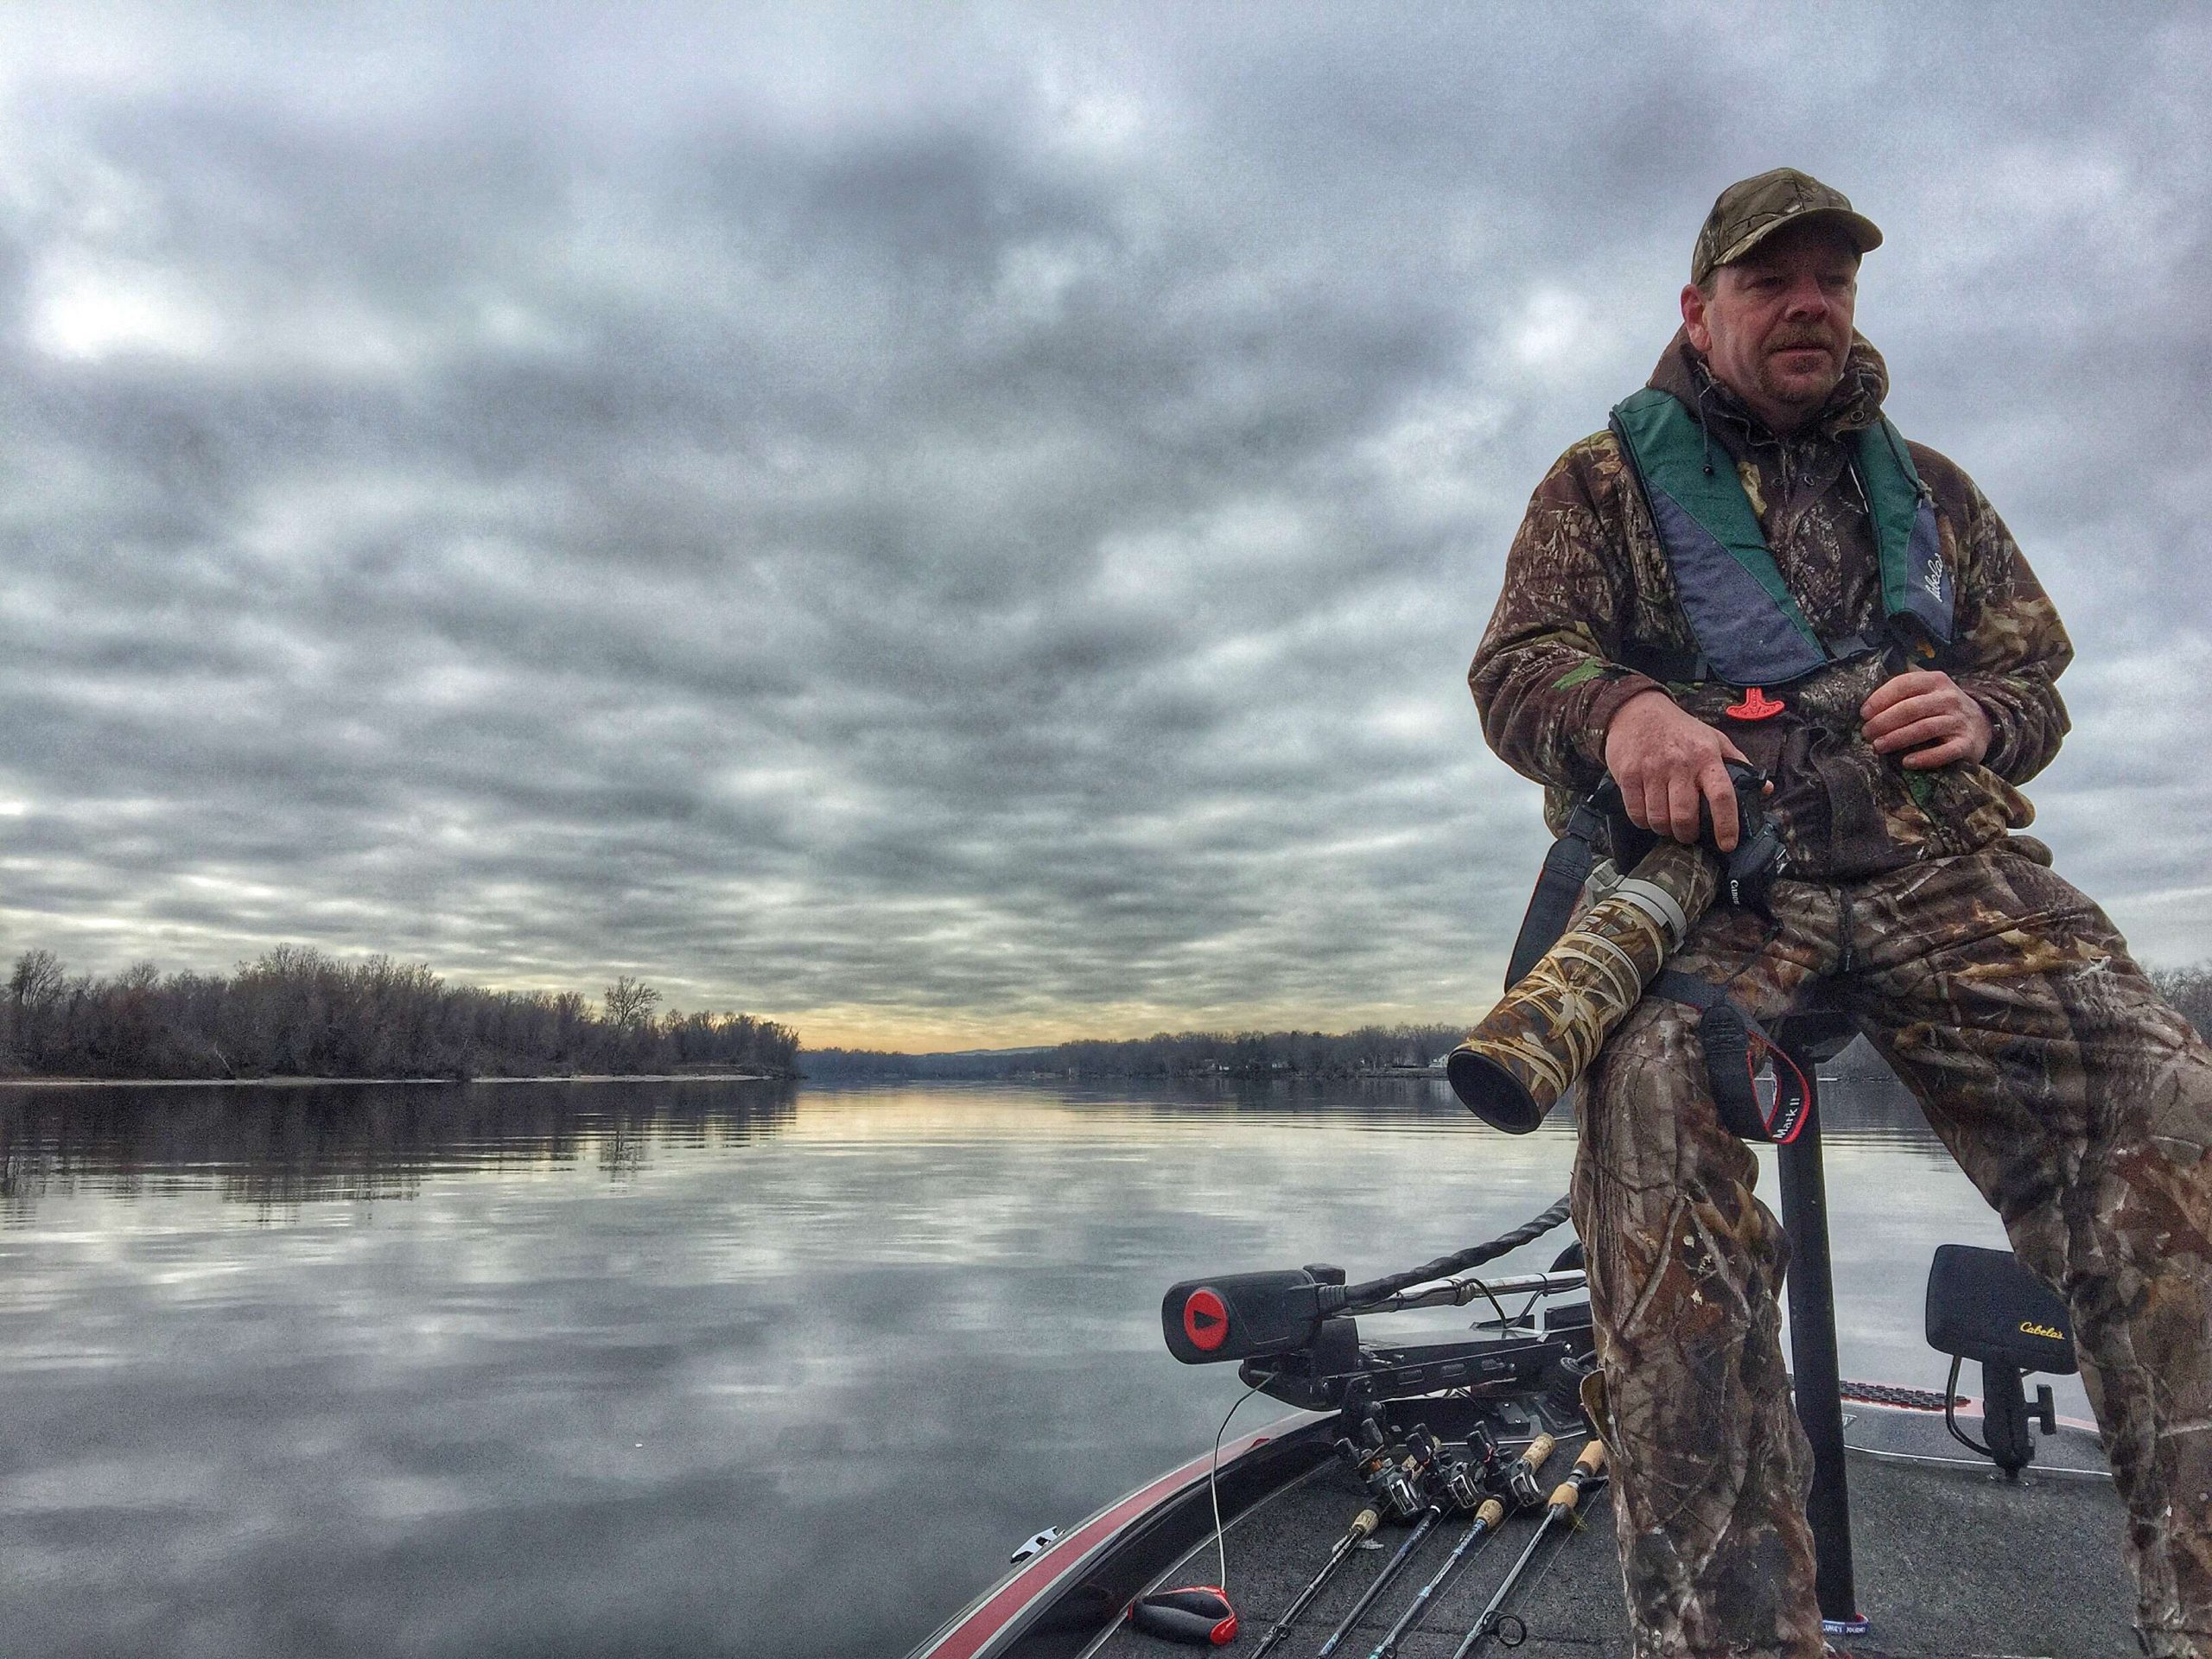 Meet Jason Potter from Higganum, Conn., he's been fishing these waters for smallmouth for years but...